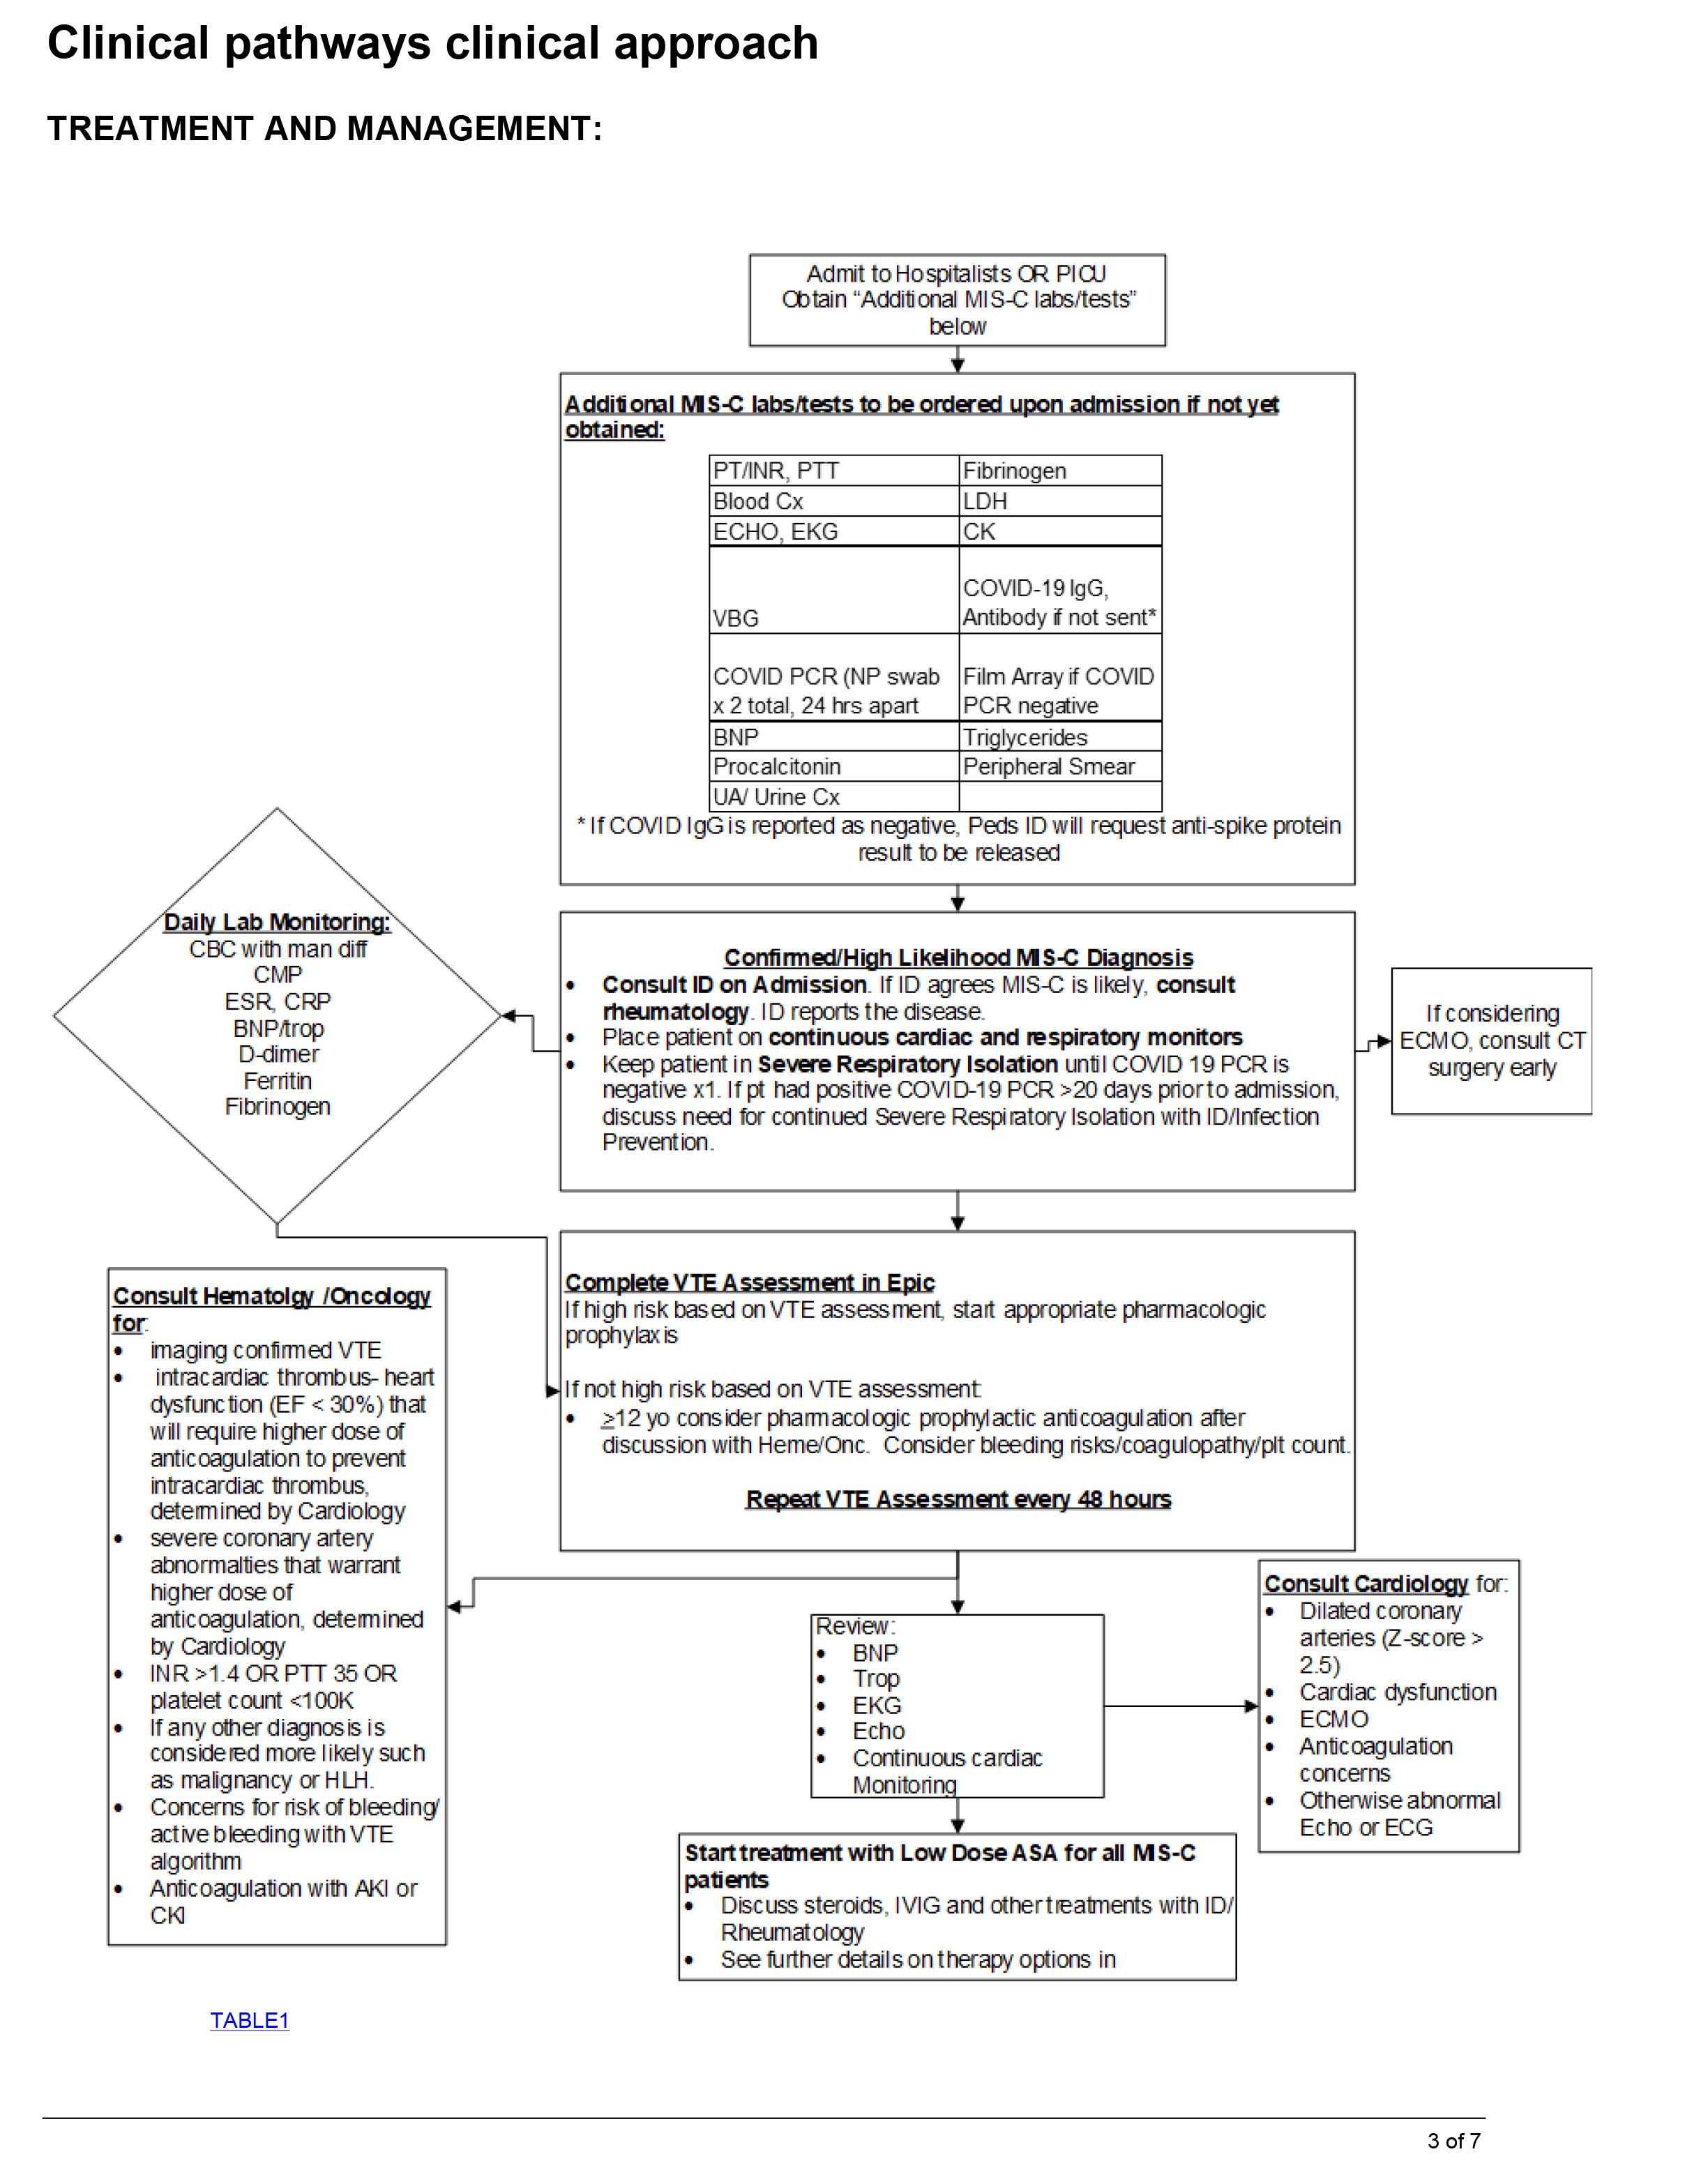 Clinical Guidelines Document Image 3